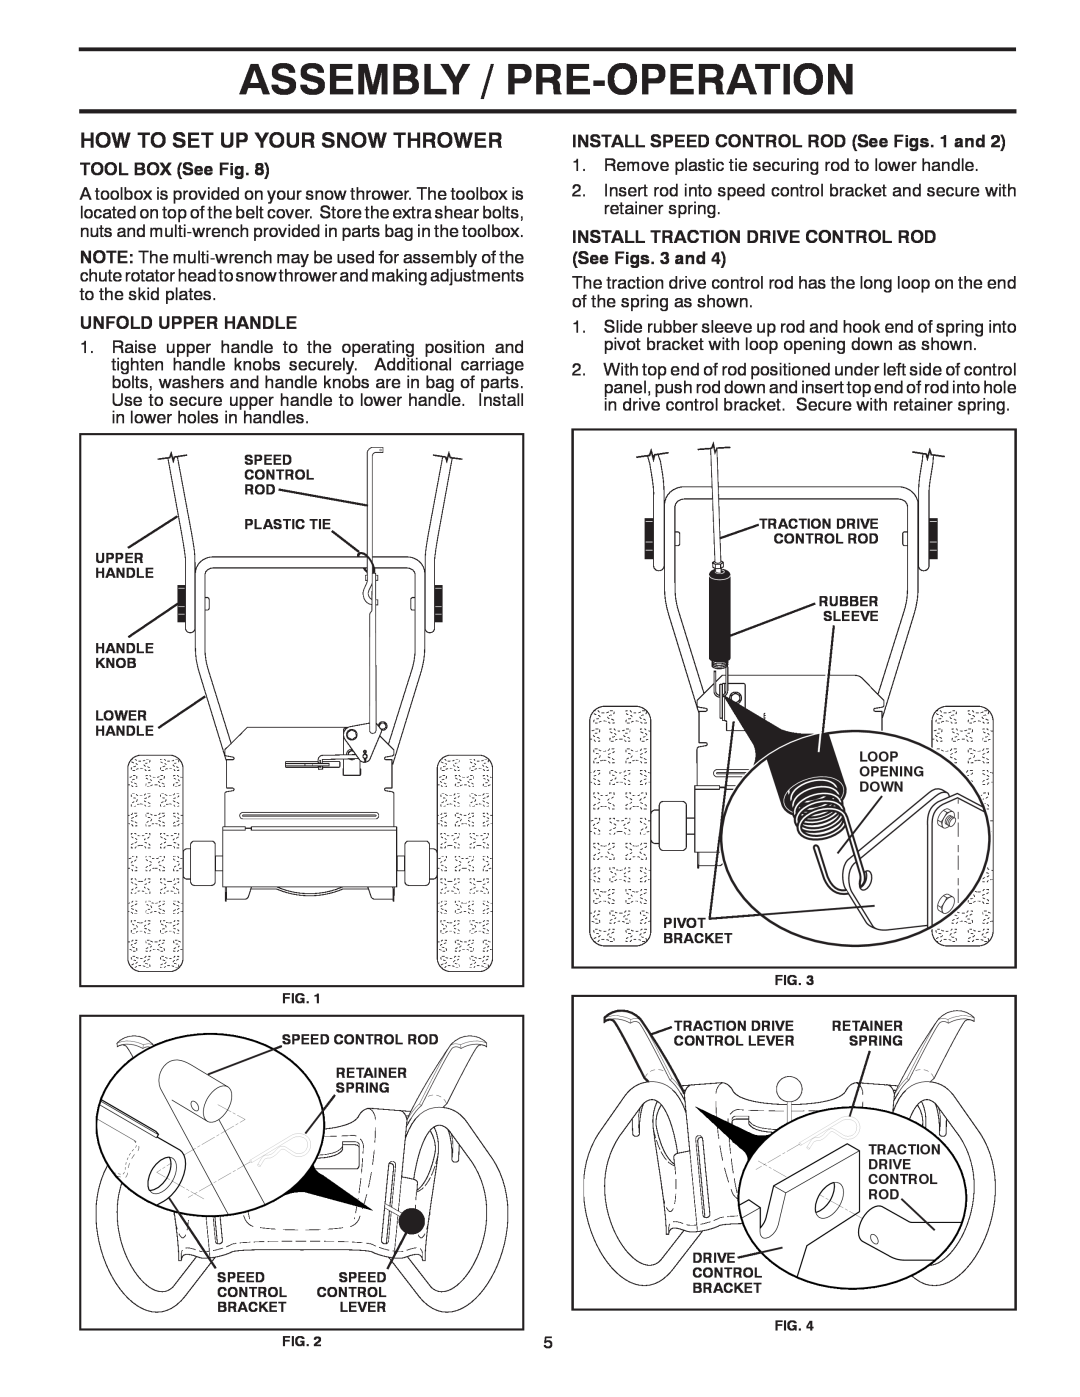 Poulan 96194000504 How To Set Up Your Snow Thrower, Assembly / Pre-Operation, TOOL BOX See Fig, Unfold Upper Handle 